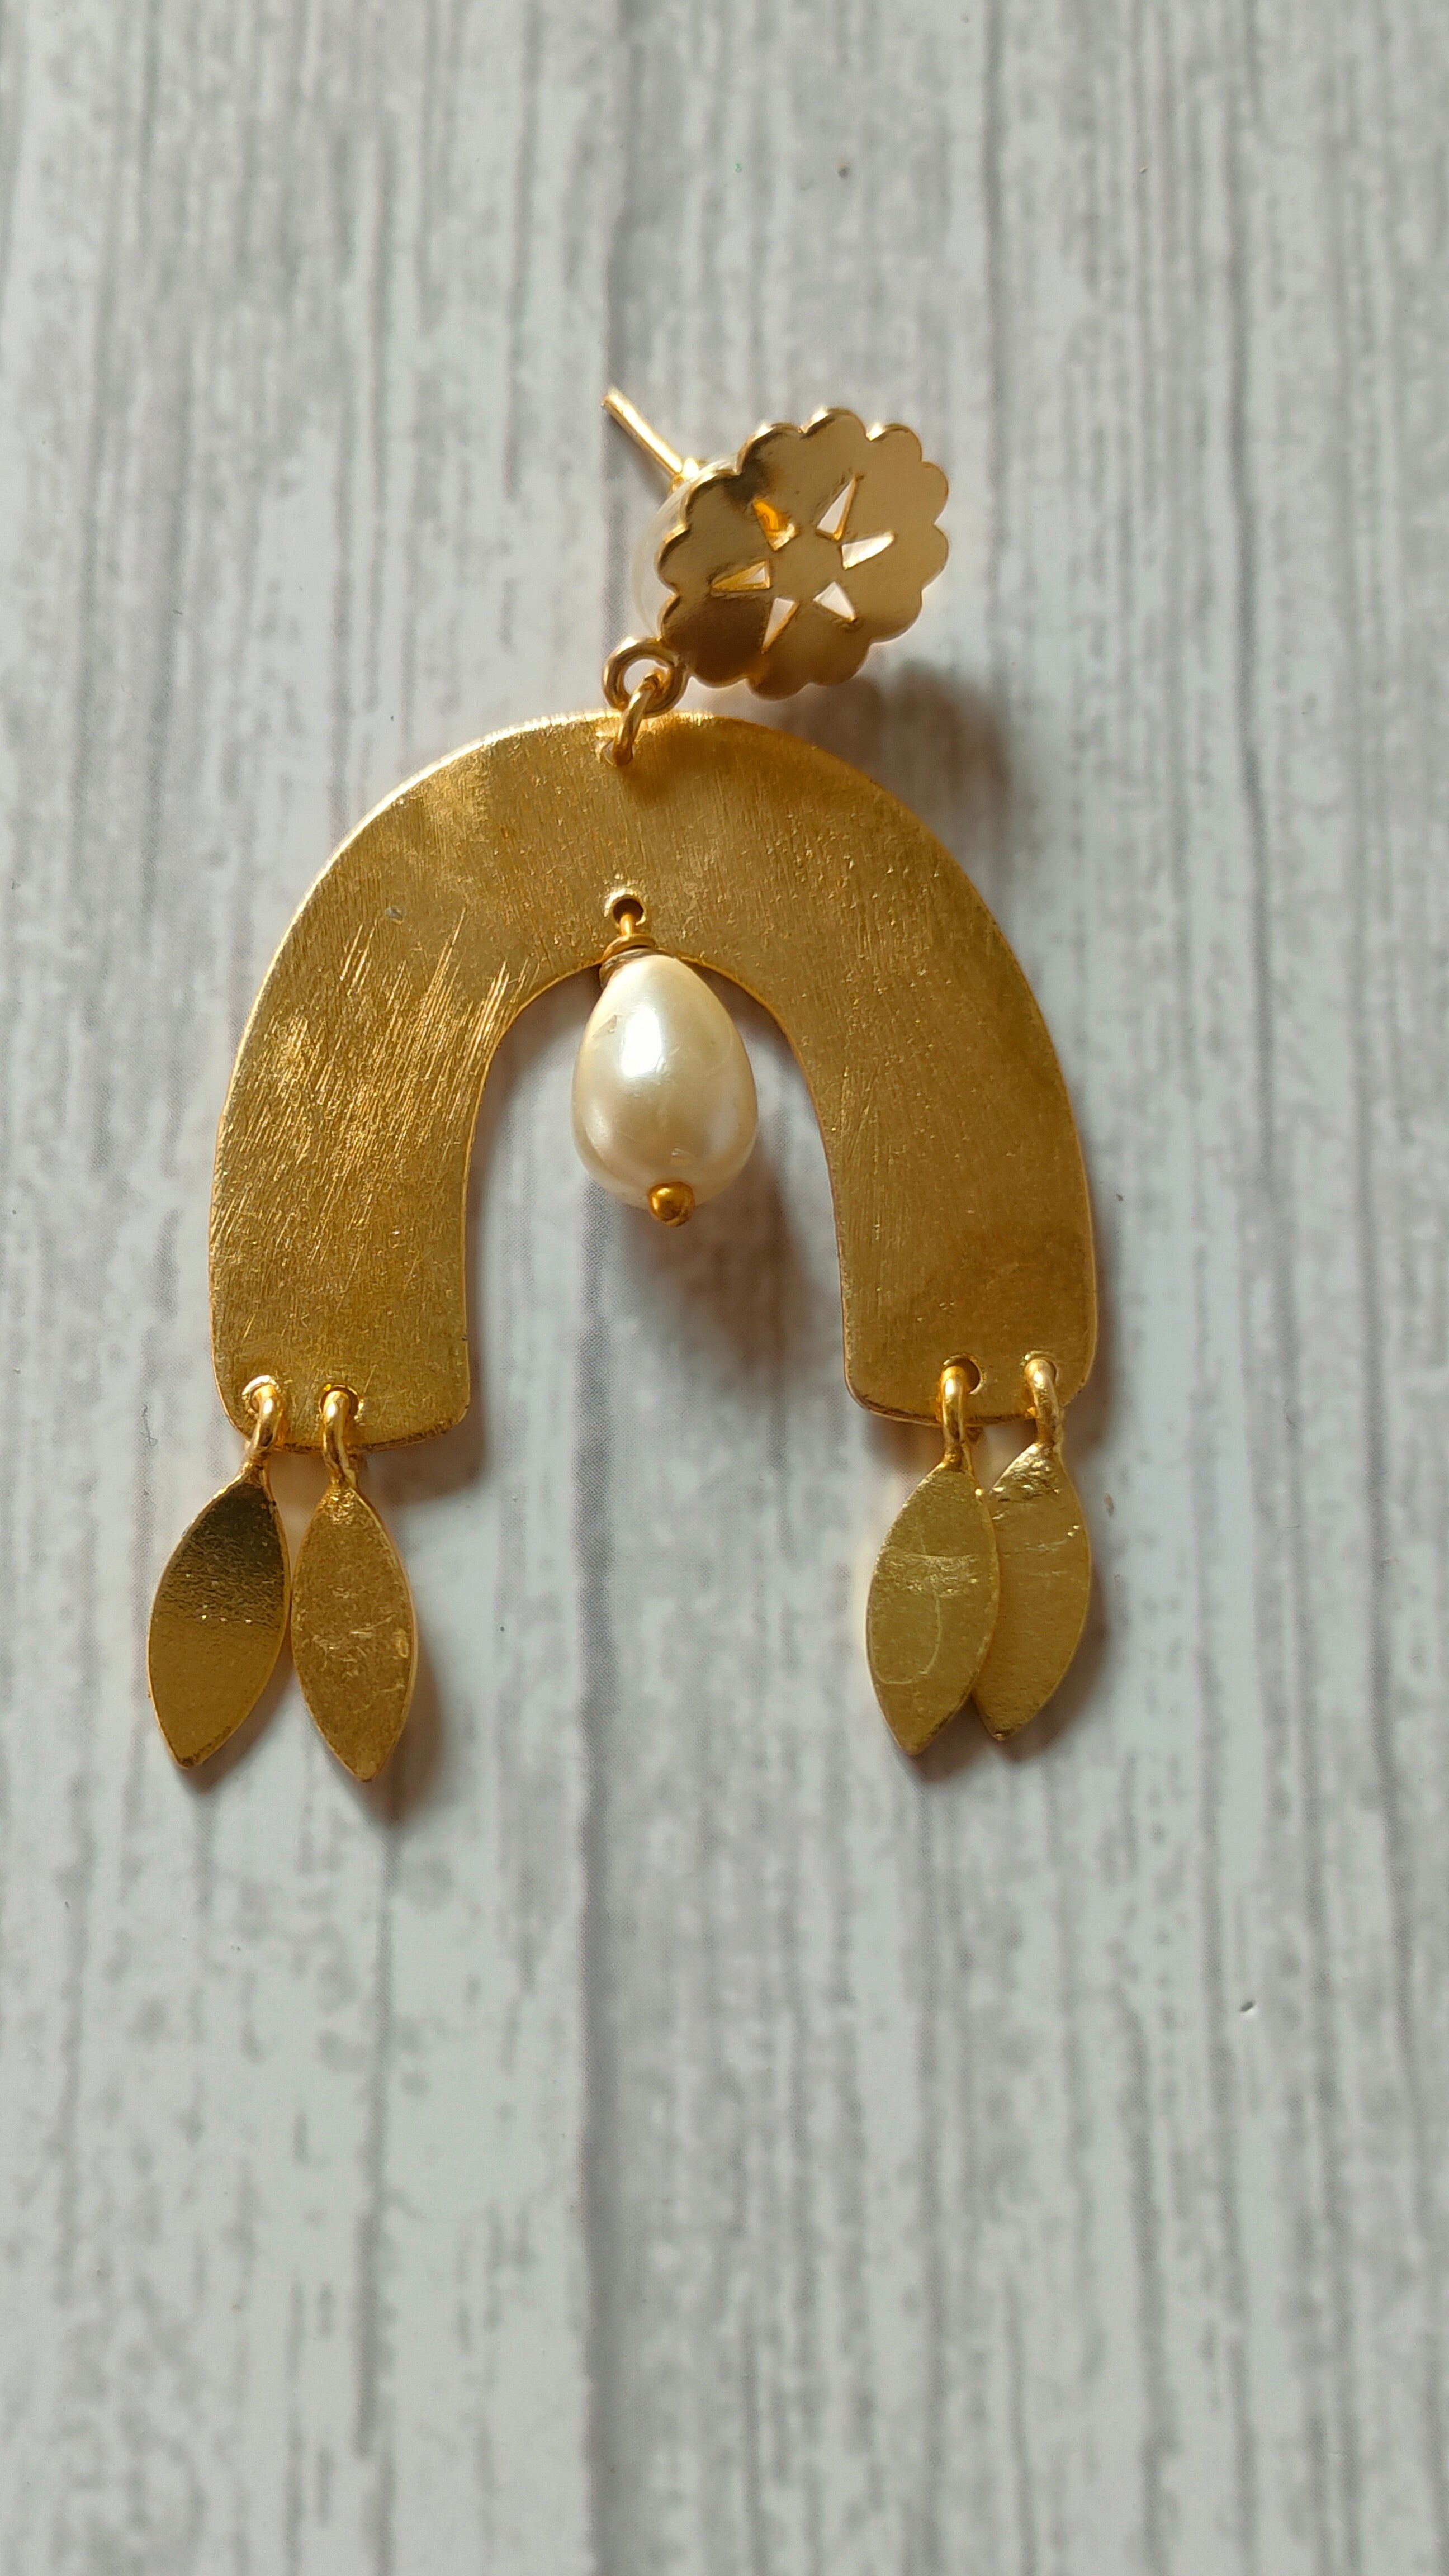 Horse Shoe Brass Earrings with Leaf Danglers and Pearl Beads